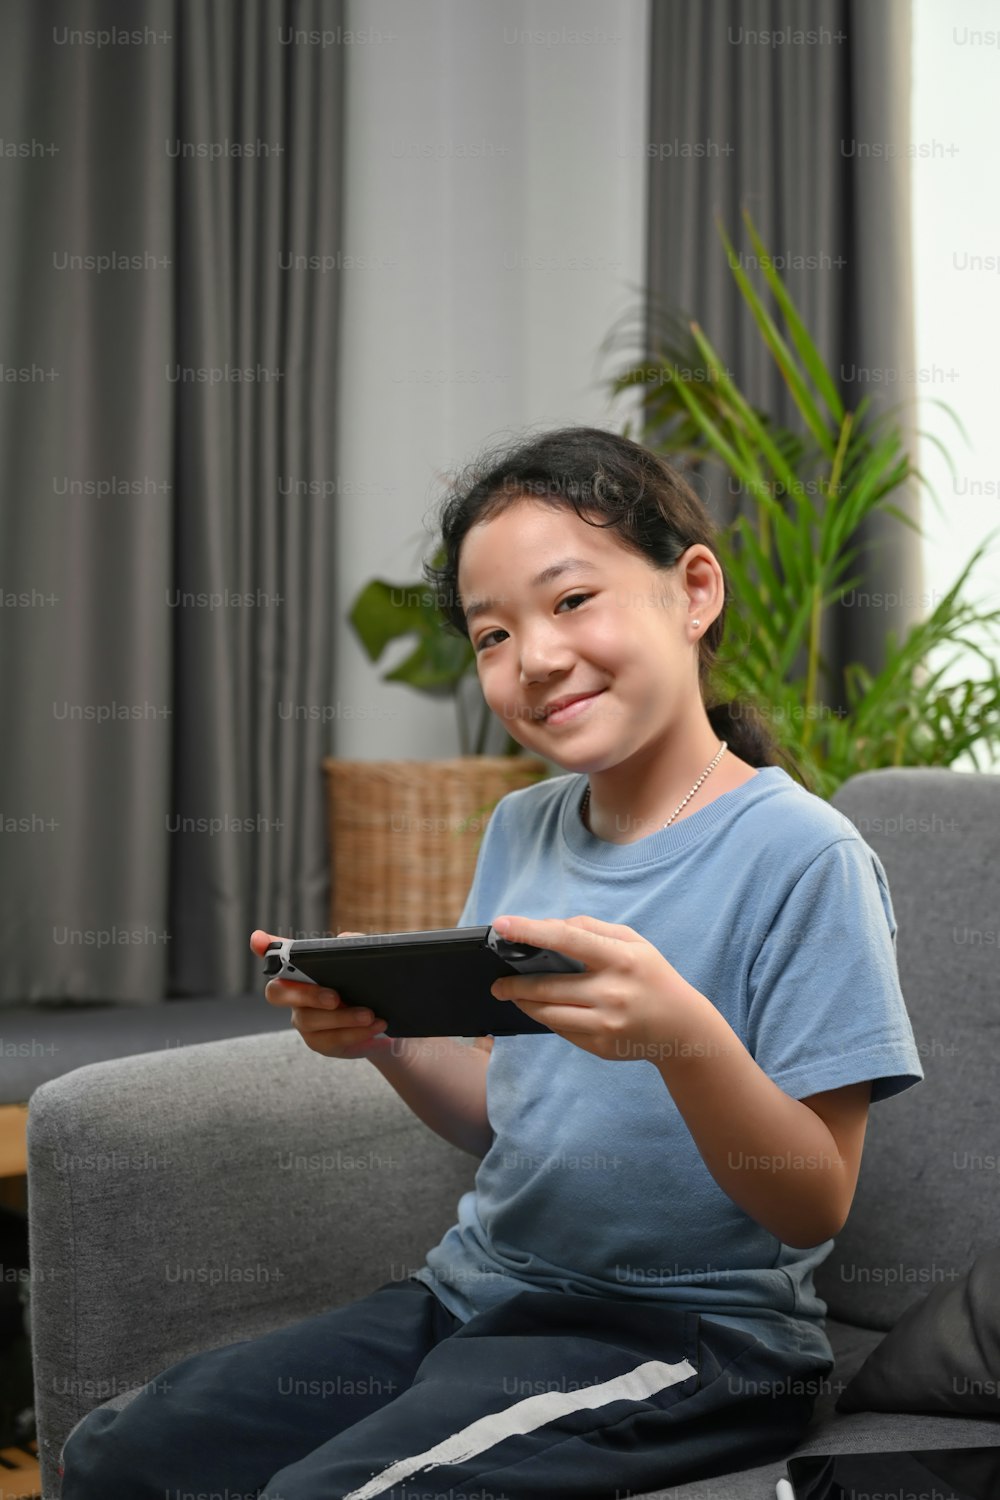 Portrait of happy little girl playing video game while sitting on couch at home.